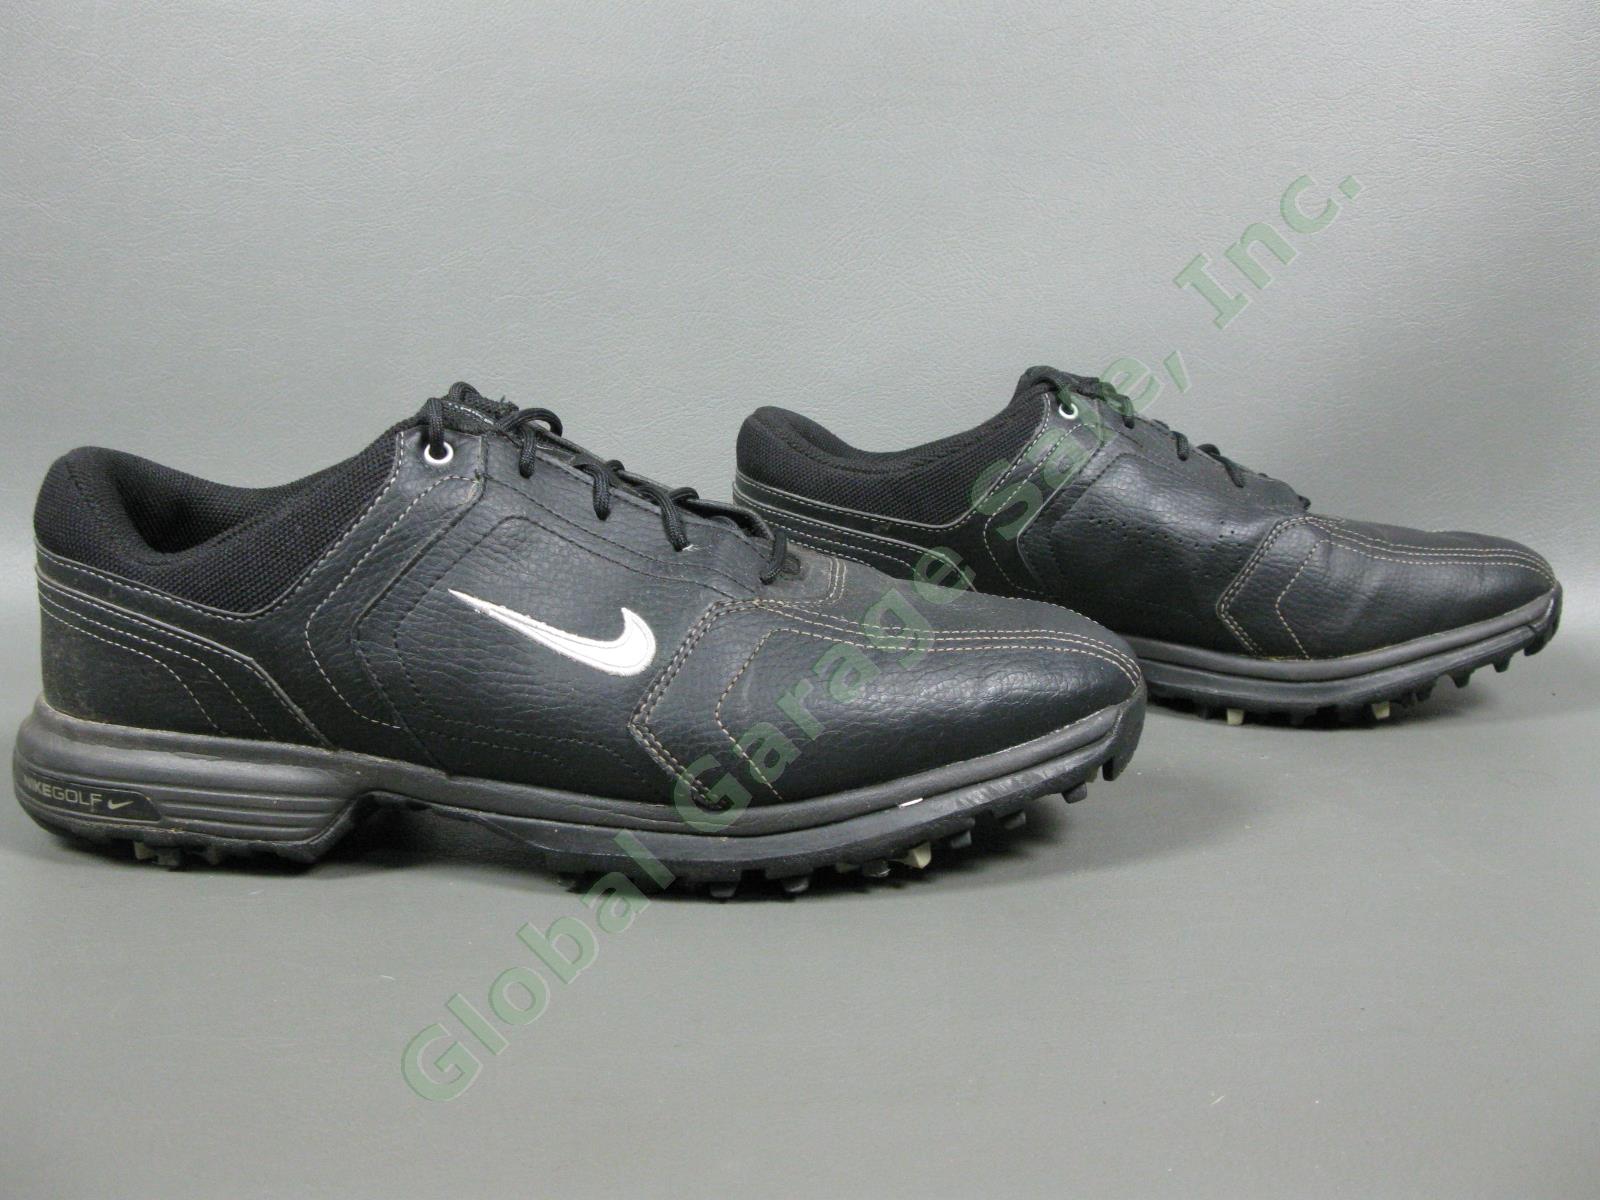 Nike Heritage Mens Leather Golf Shoe Pair Size 10 Black White Athletic Shoes 4